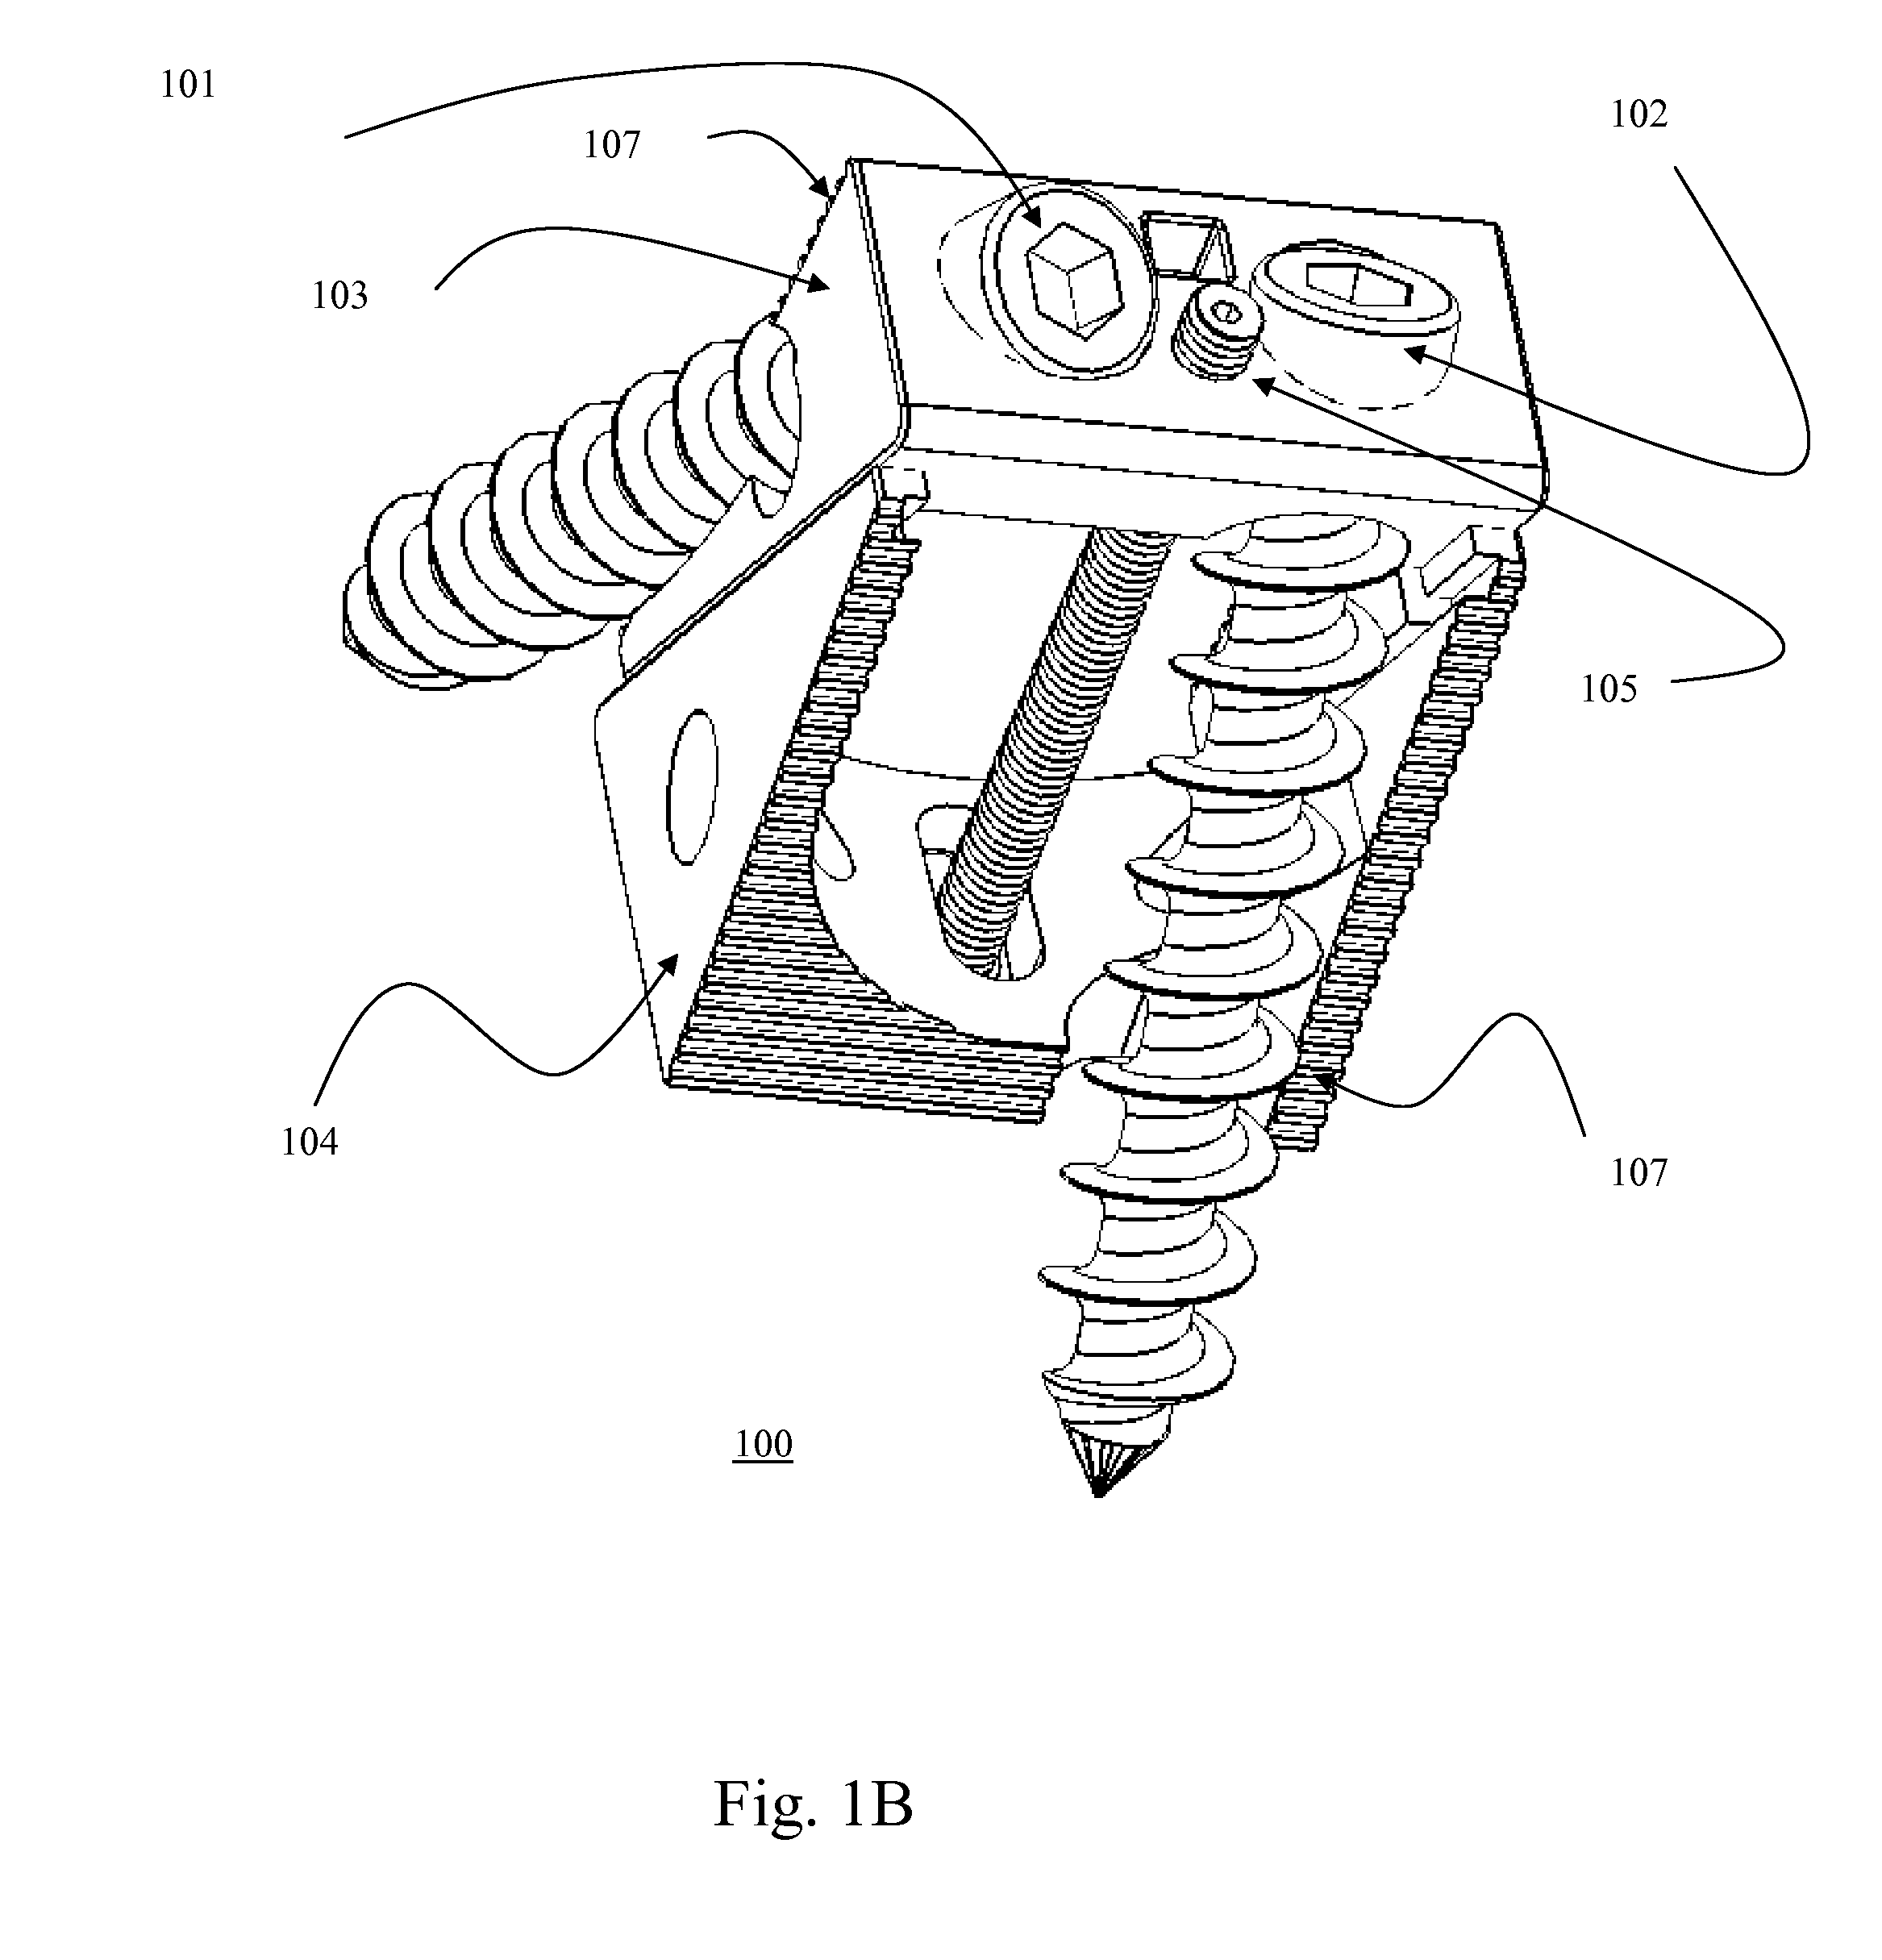 Bi-directional fixating transvertebral body screws and posterior cervical and lumbar interarticulating joint calibrated stapling devices for spinal fusion